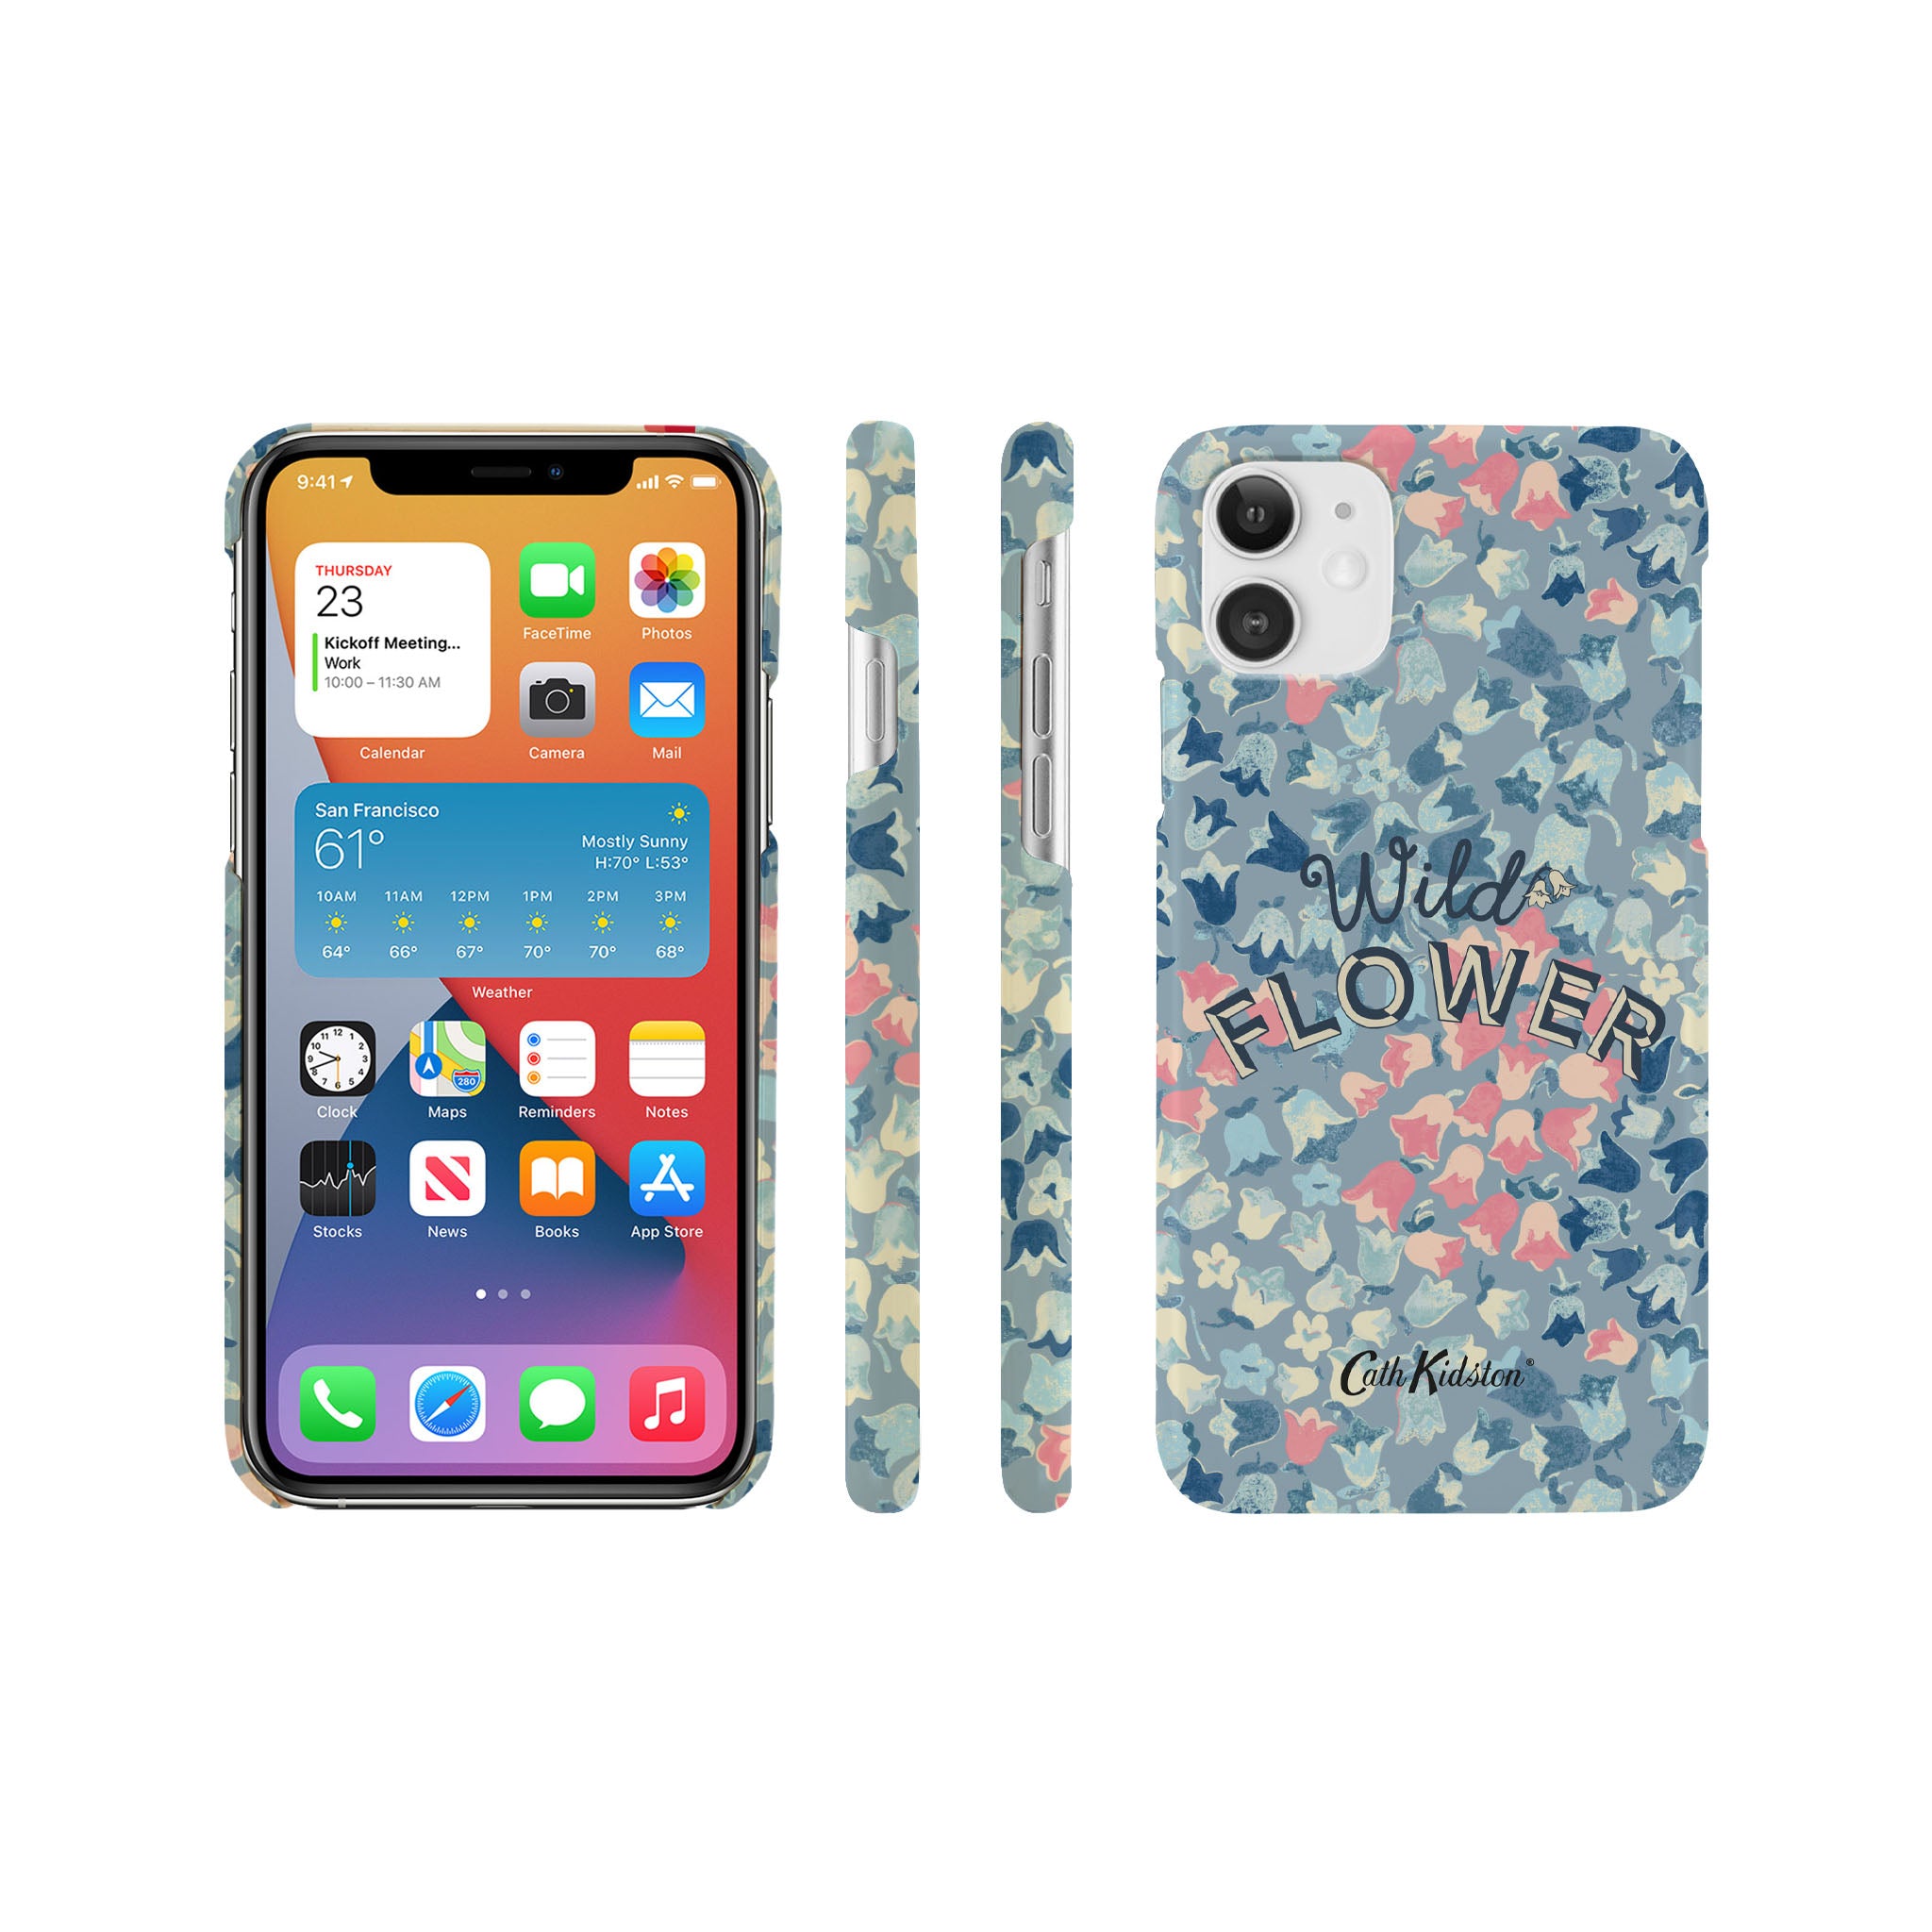 The MYVQ iPhone series 11 premium high gloss scratch-resistant phone case. Featuring a luxurious microfiber insert to cradle and protect your smartphone device.  